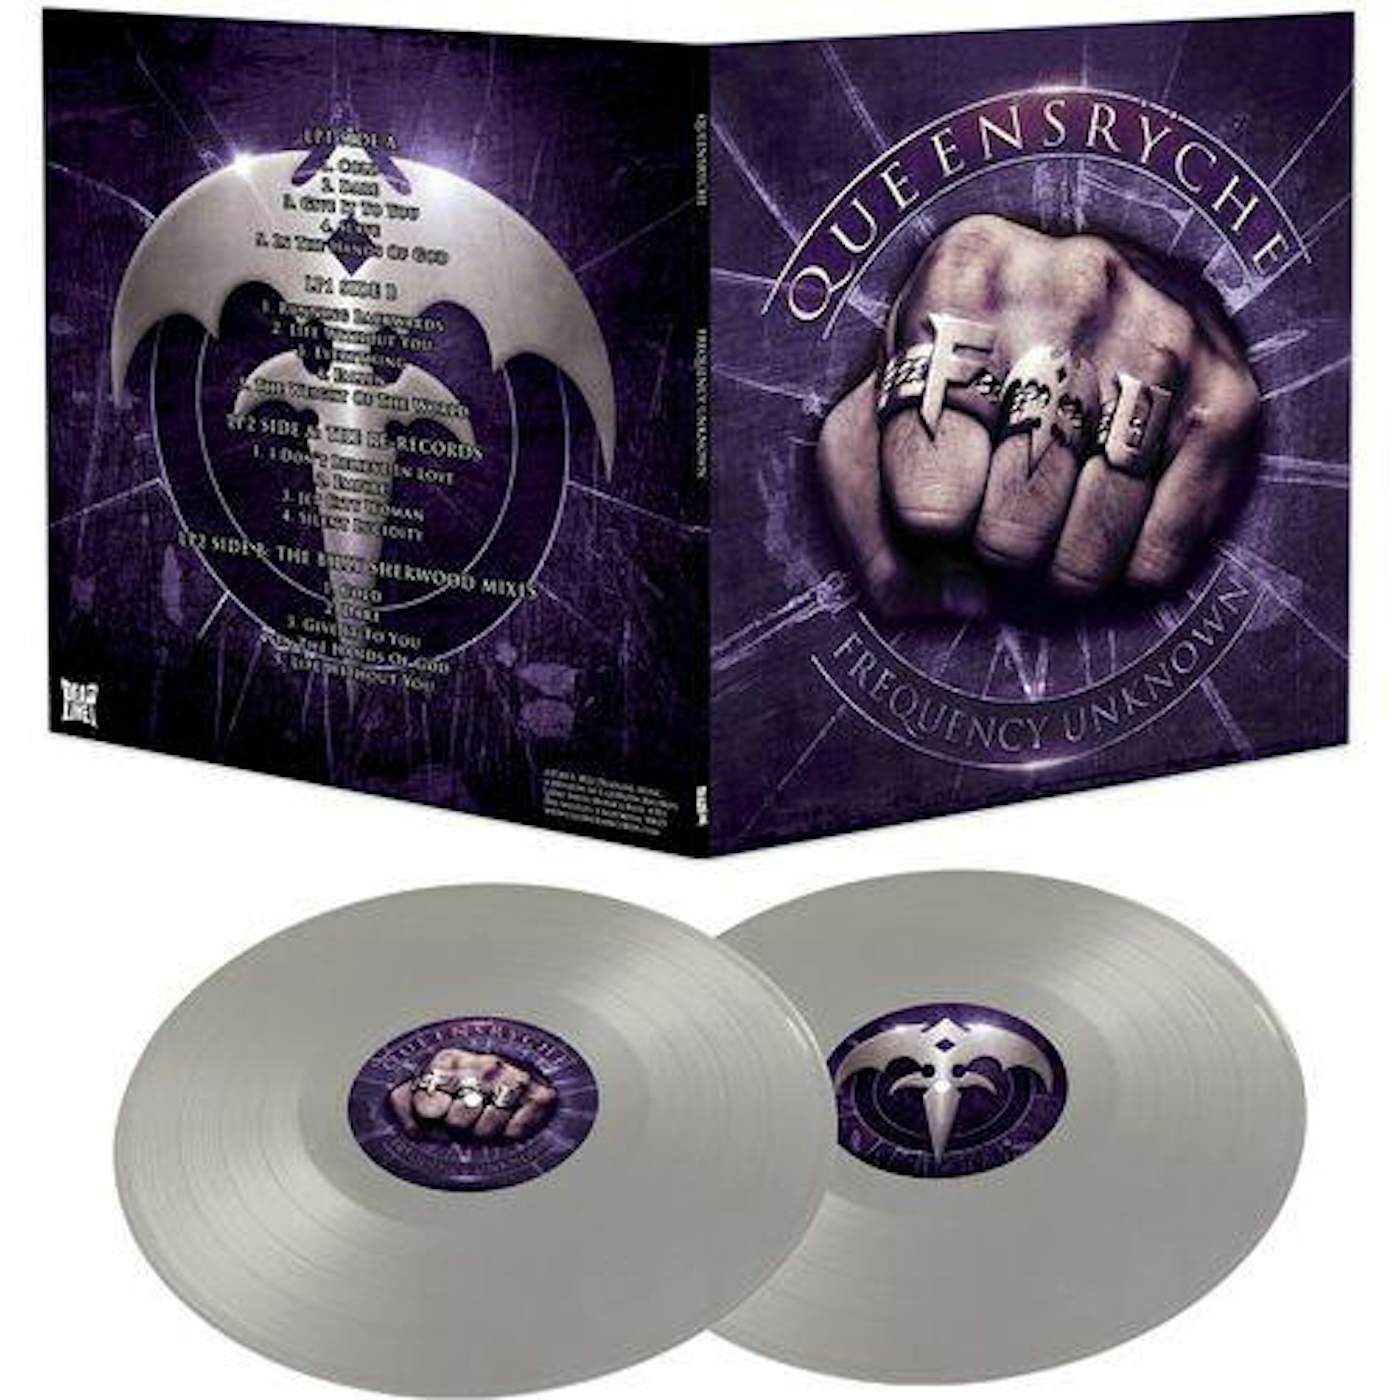 Queensrÿche Frequency Unknown - Silver Vinyl Record